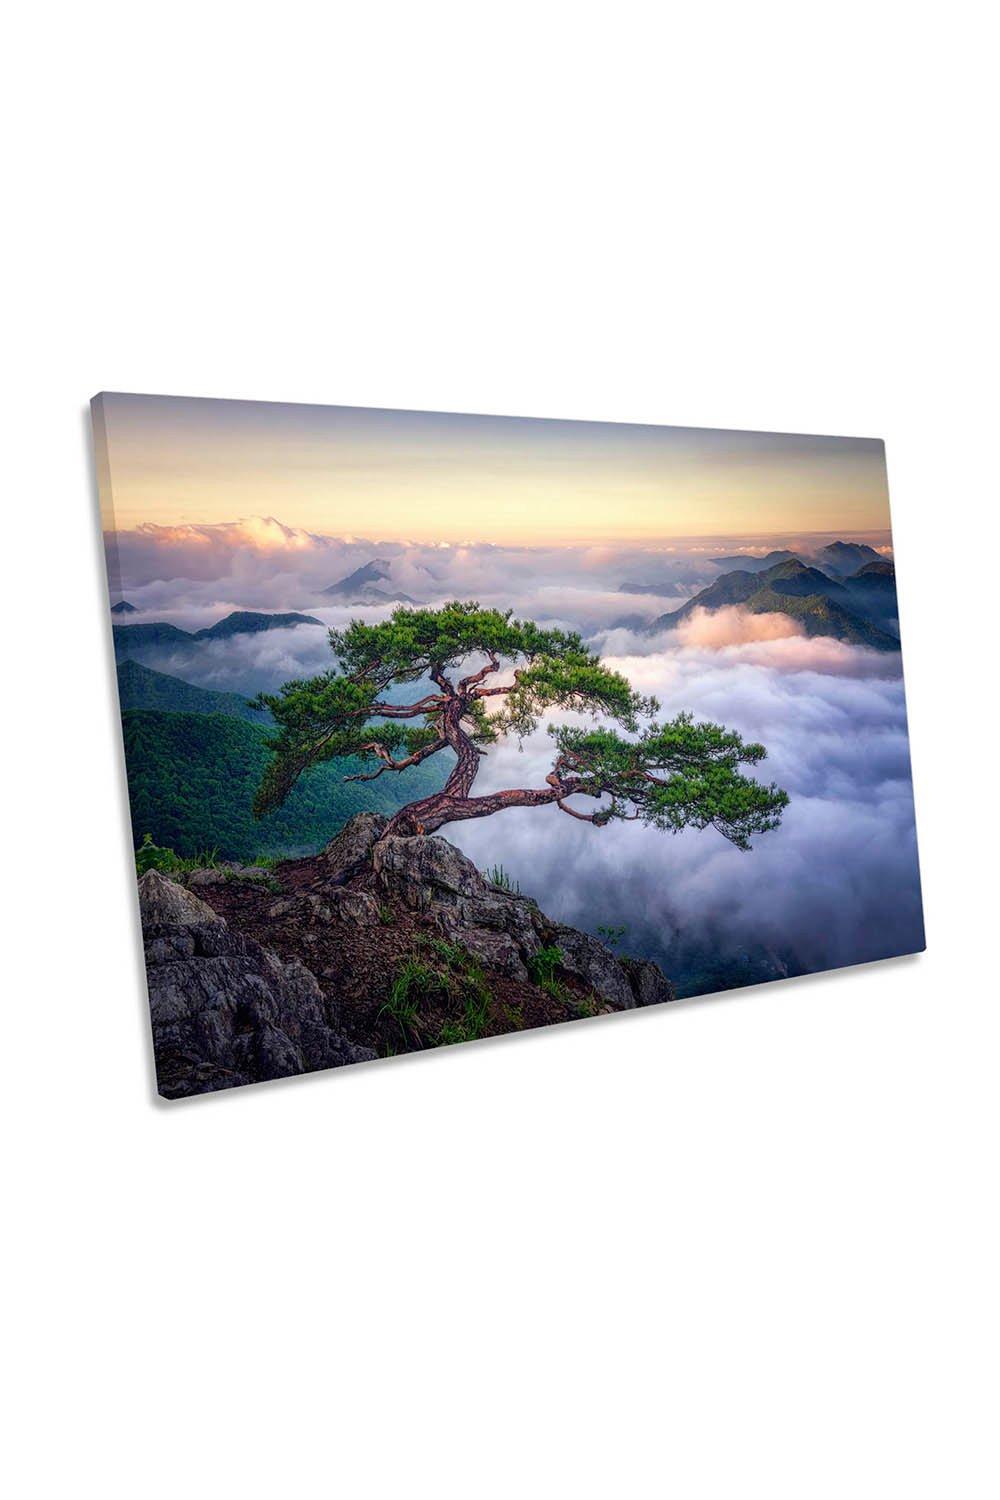 On the Rock Mountain Bonsai Tree Cloudy Canvas Wall Art Picture Print